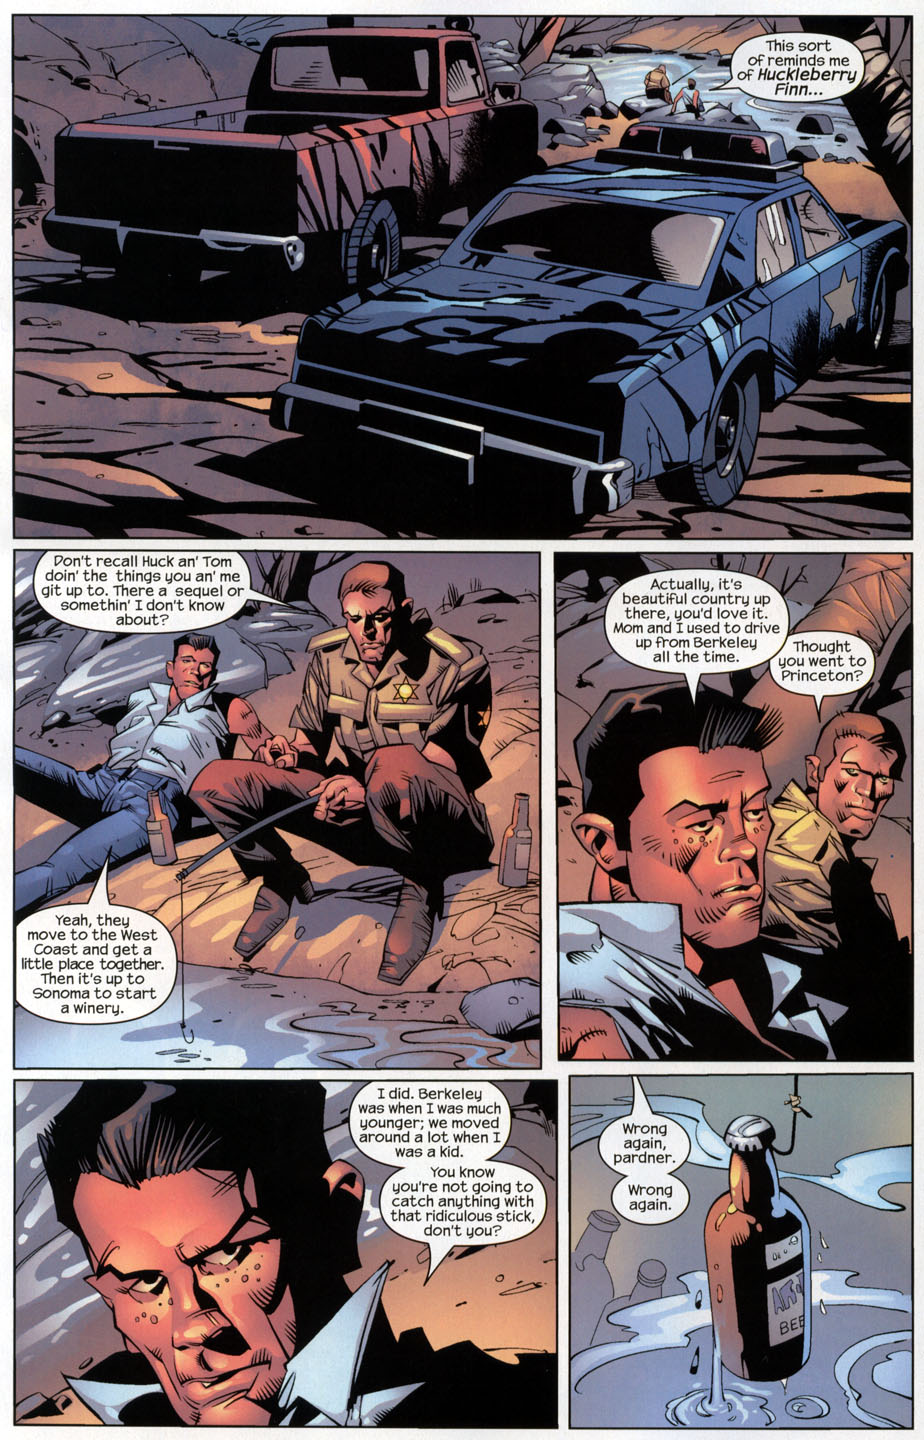 The Punisher (2001) issue 29 - Streets of Laredo #02 - Page 10